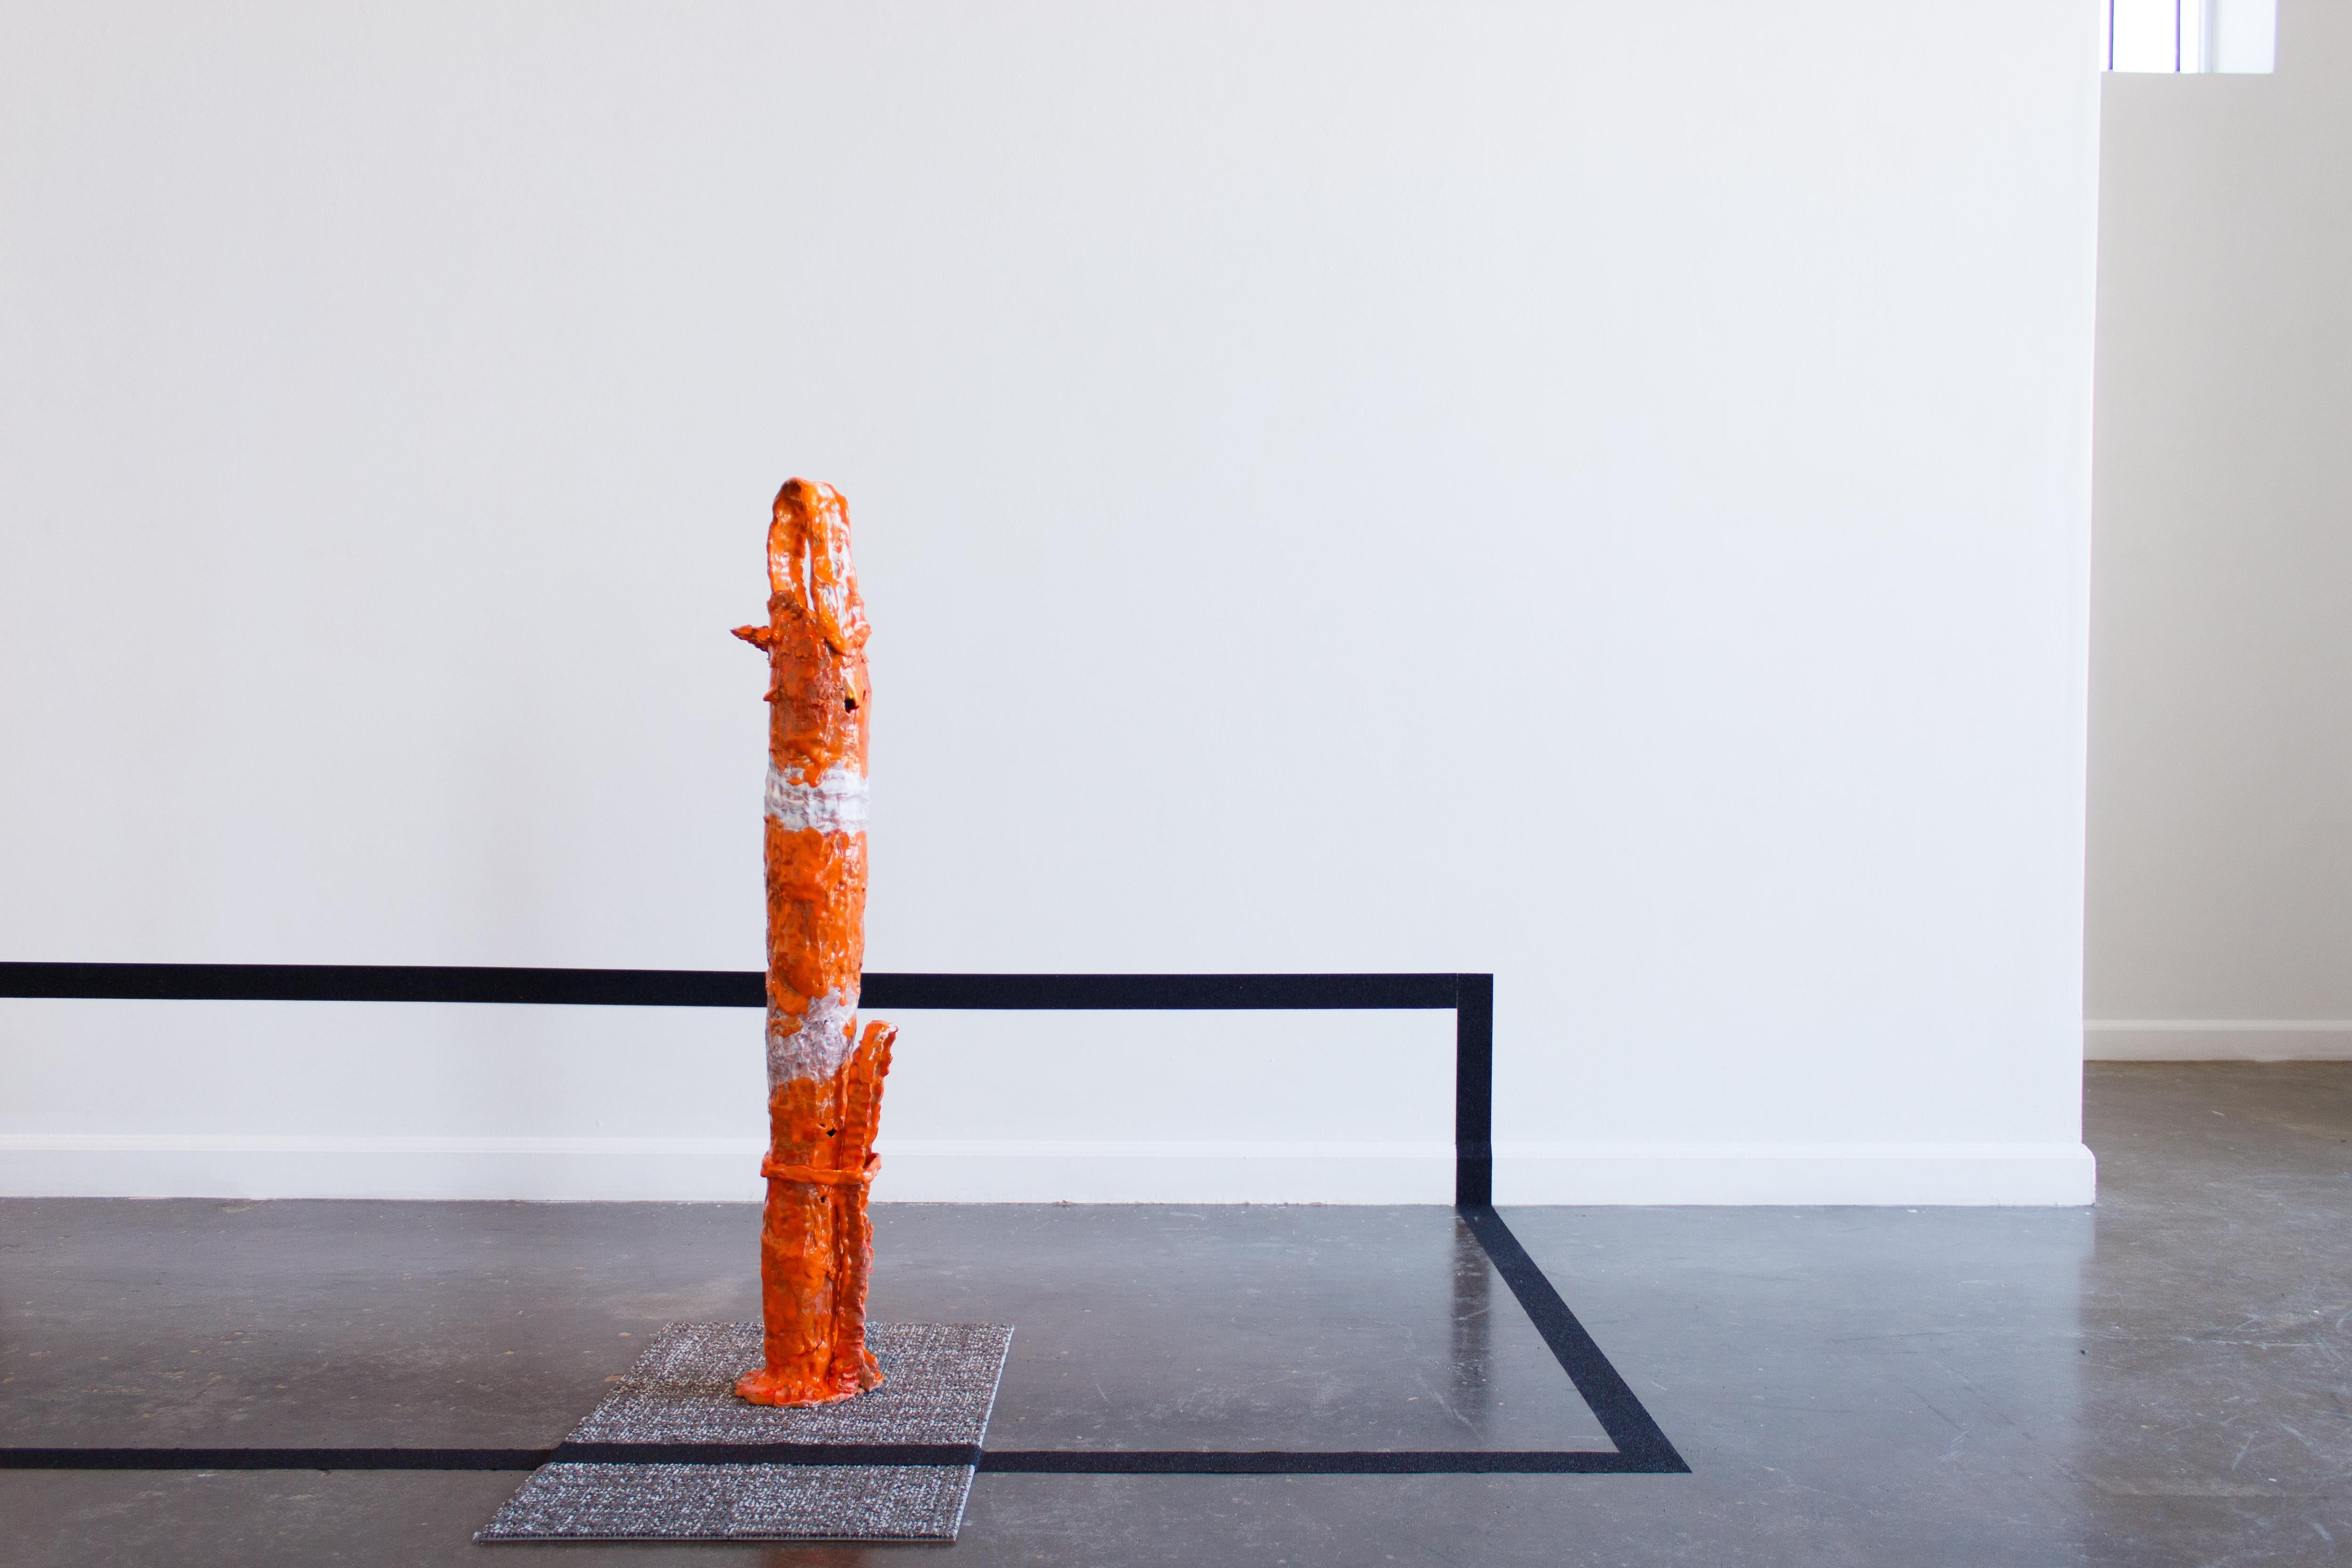 Untitled (Please Thank you) - Sculpture by Sam Mack